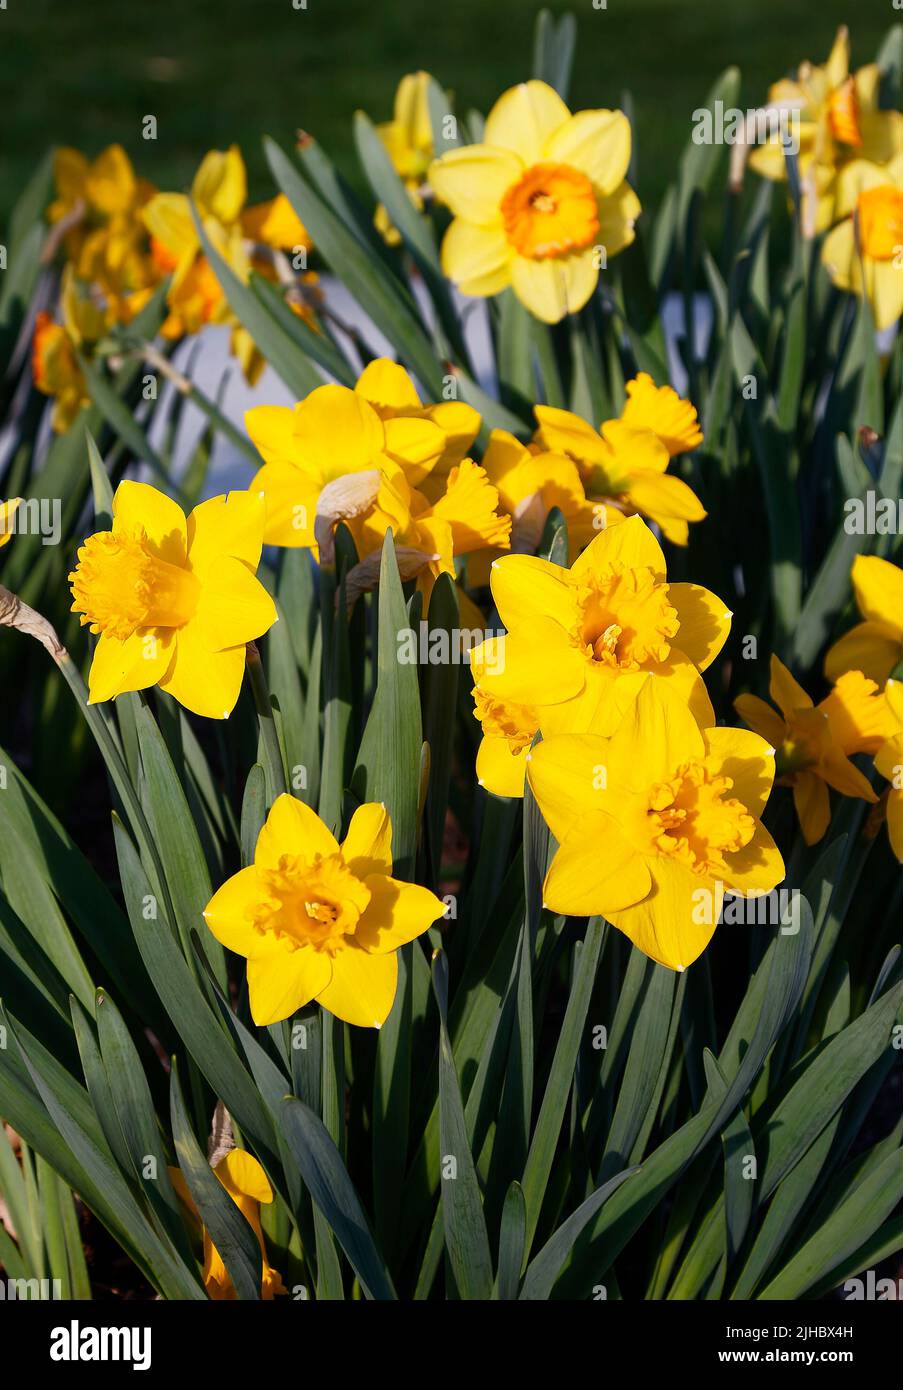 daffodils, yellow, bed, spring flowers, nature, bulbs, green leaves, garden, PA; Pennsylvania Stock Photo